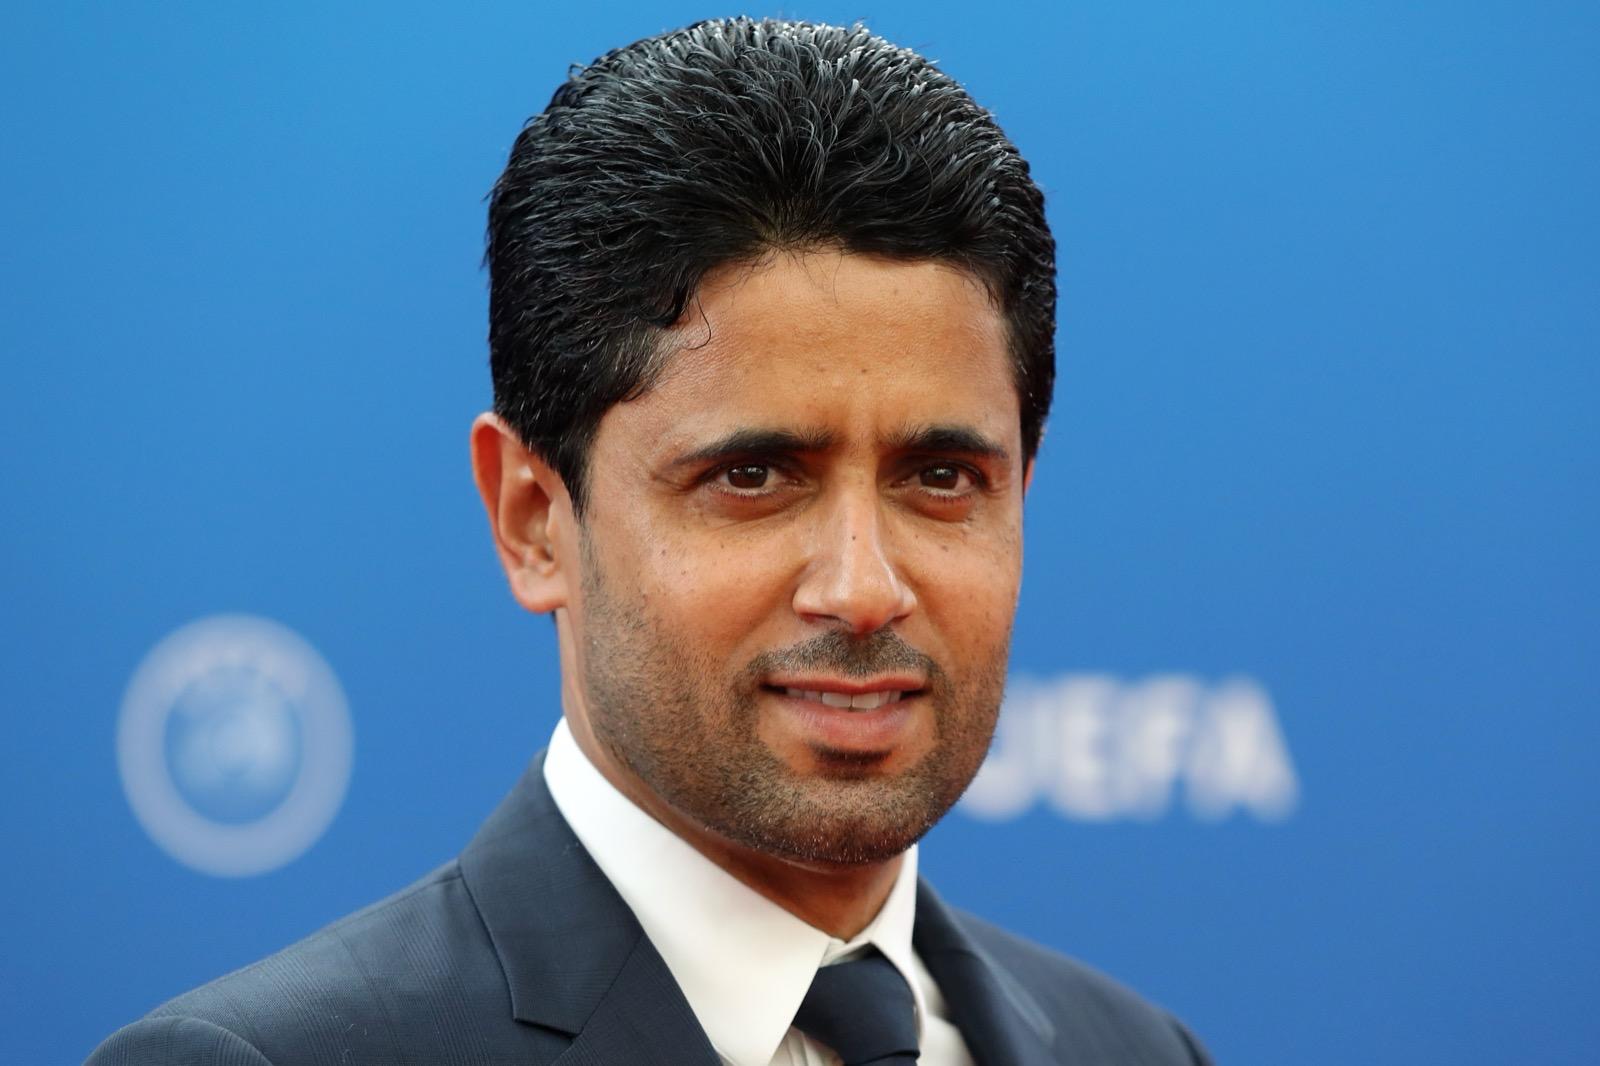 Nasser Al-Khelaifi unanimously reappointed to UEFA Executive Committee until 2028